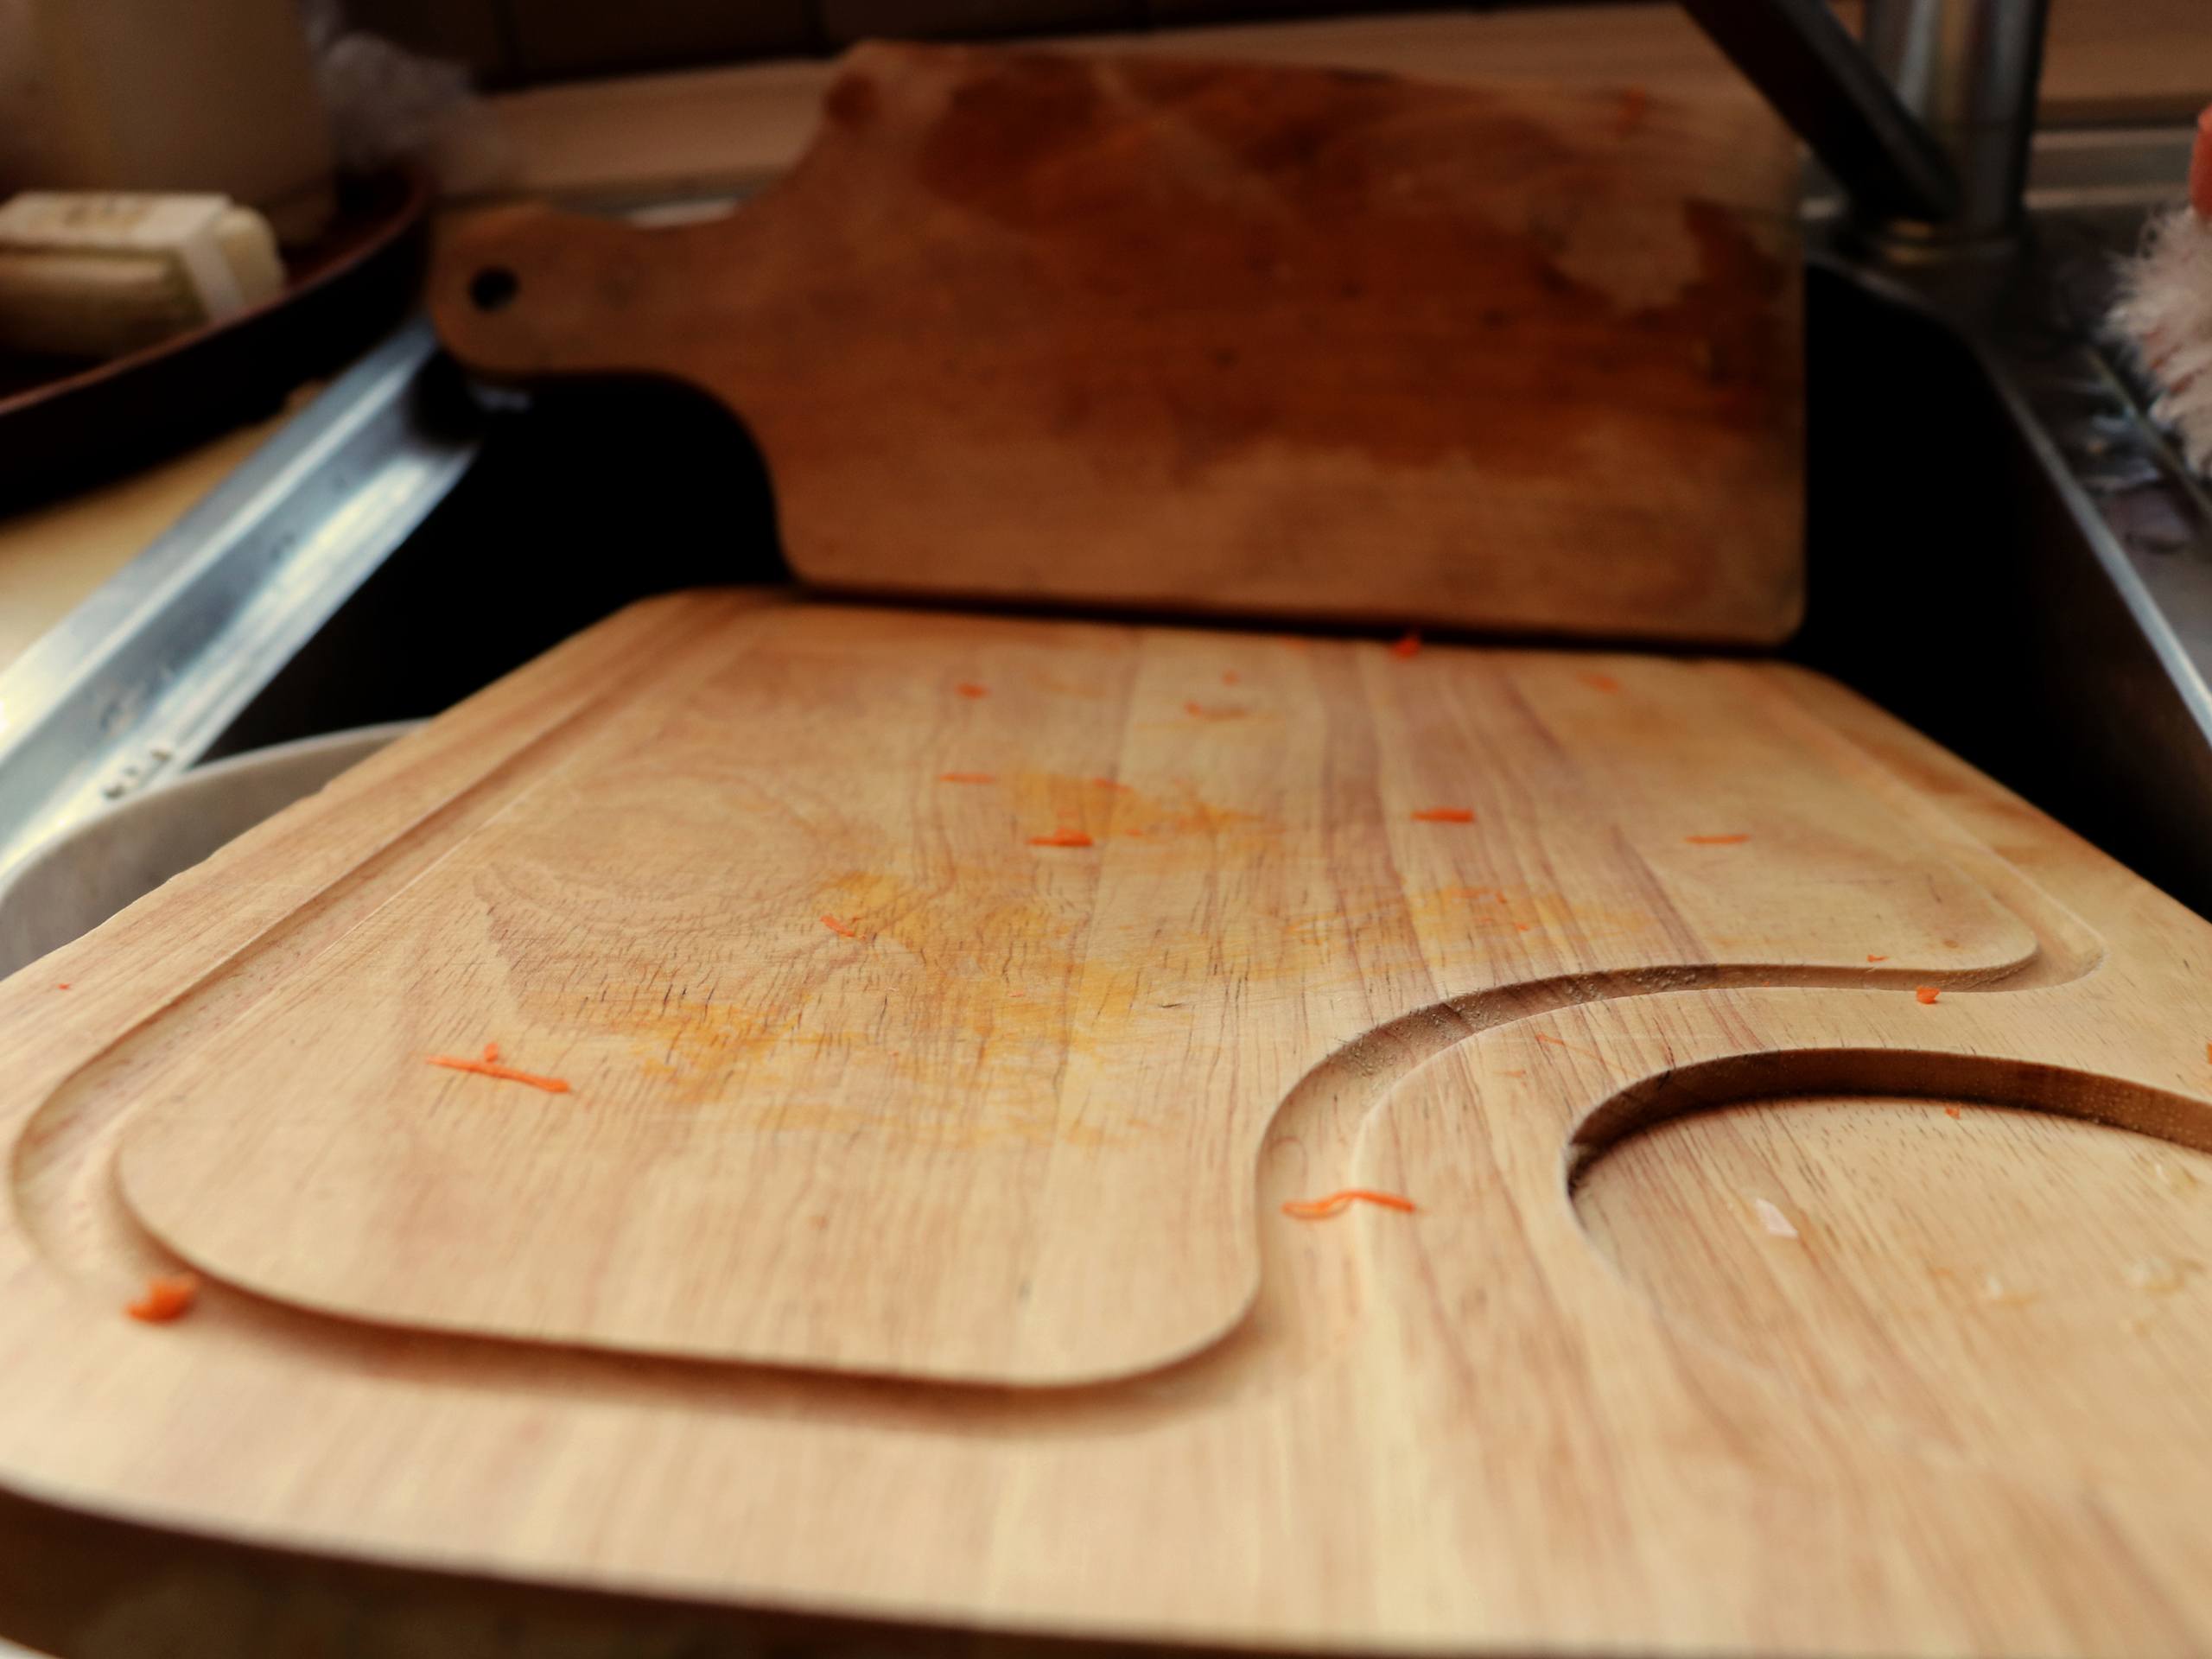 https://howtocleanthings.com/wp-content/uploads/2018/03/surfaces_woodencuttingboard.jpg